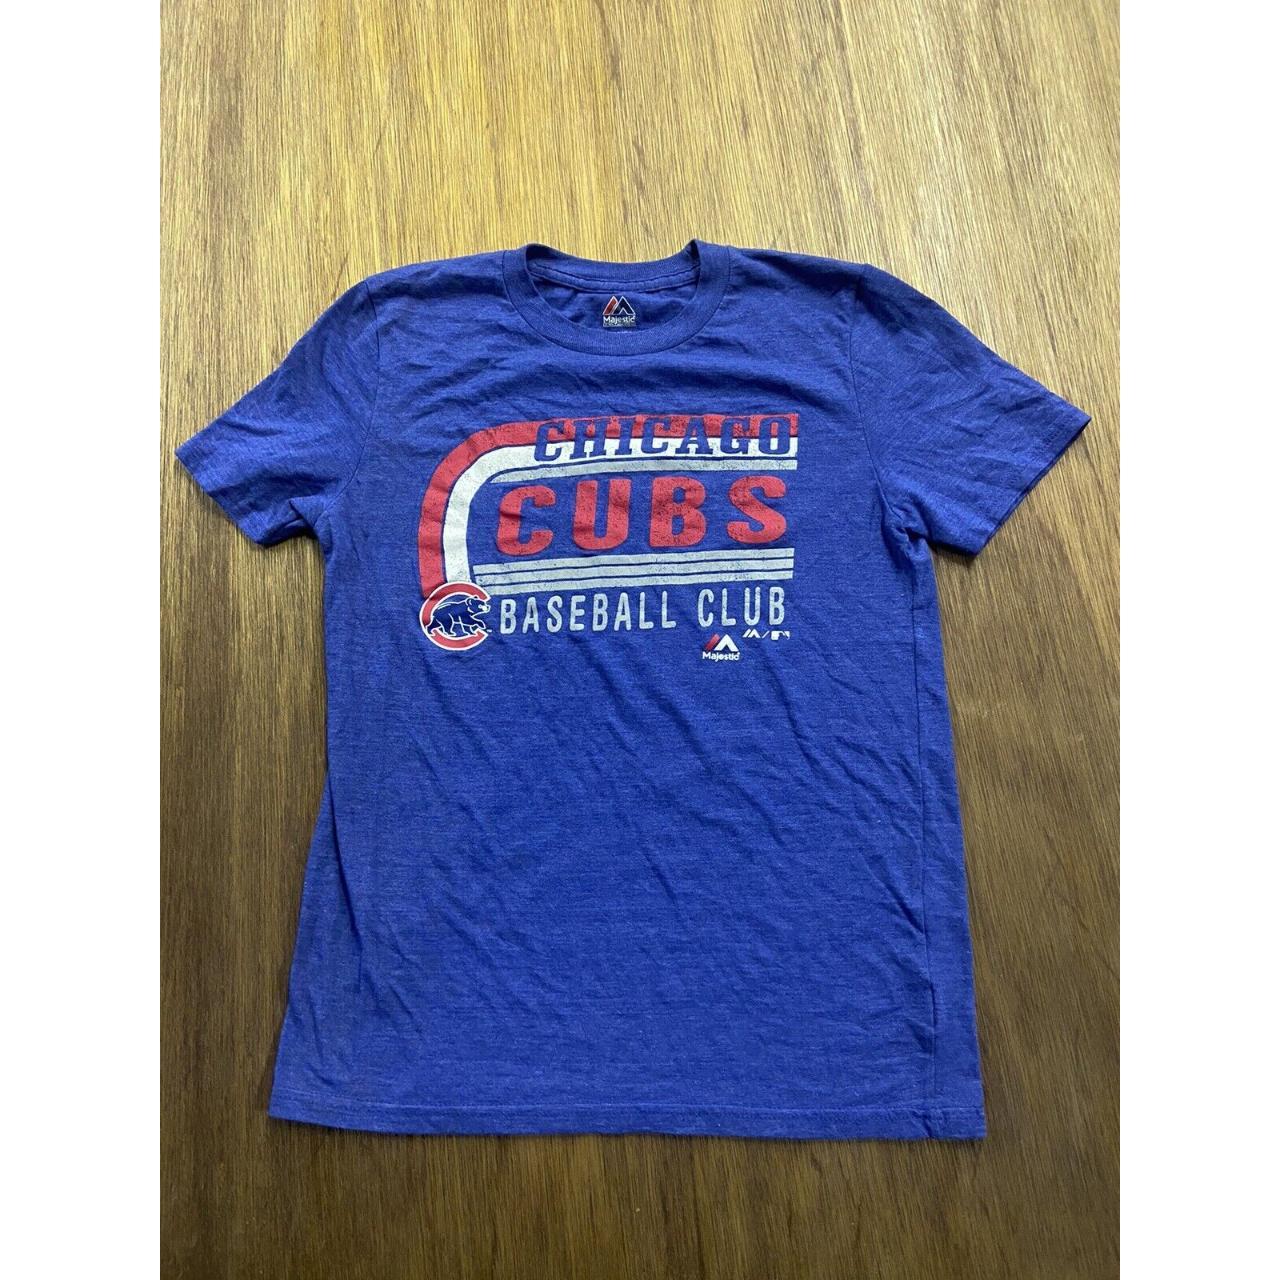 Chicago Cubs Baseball Majestic Blue T-Shirt Youth Size XL